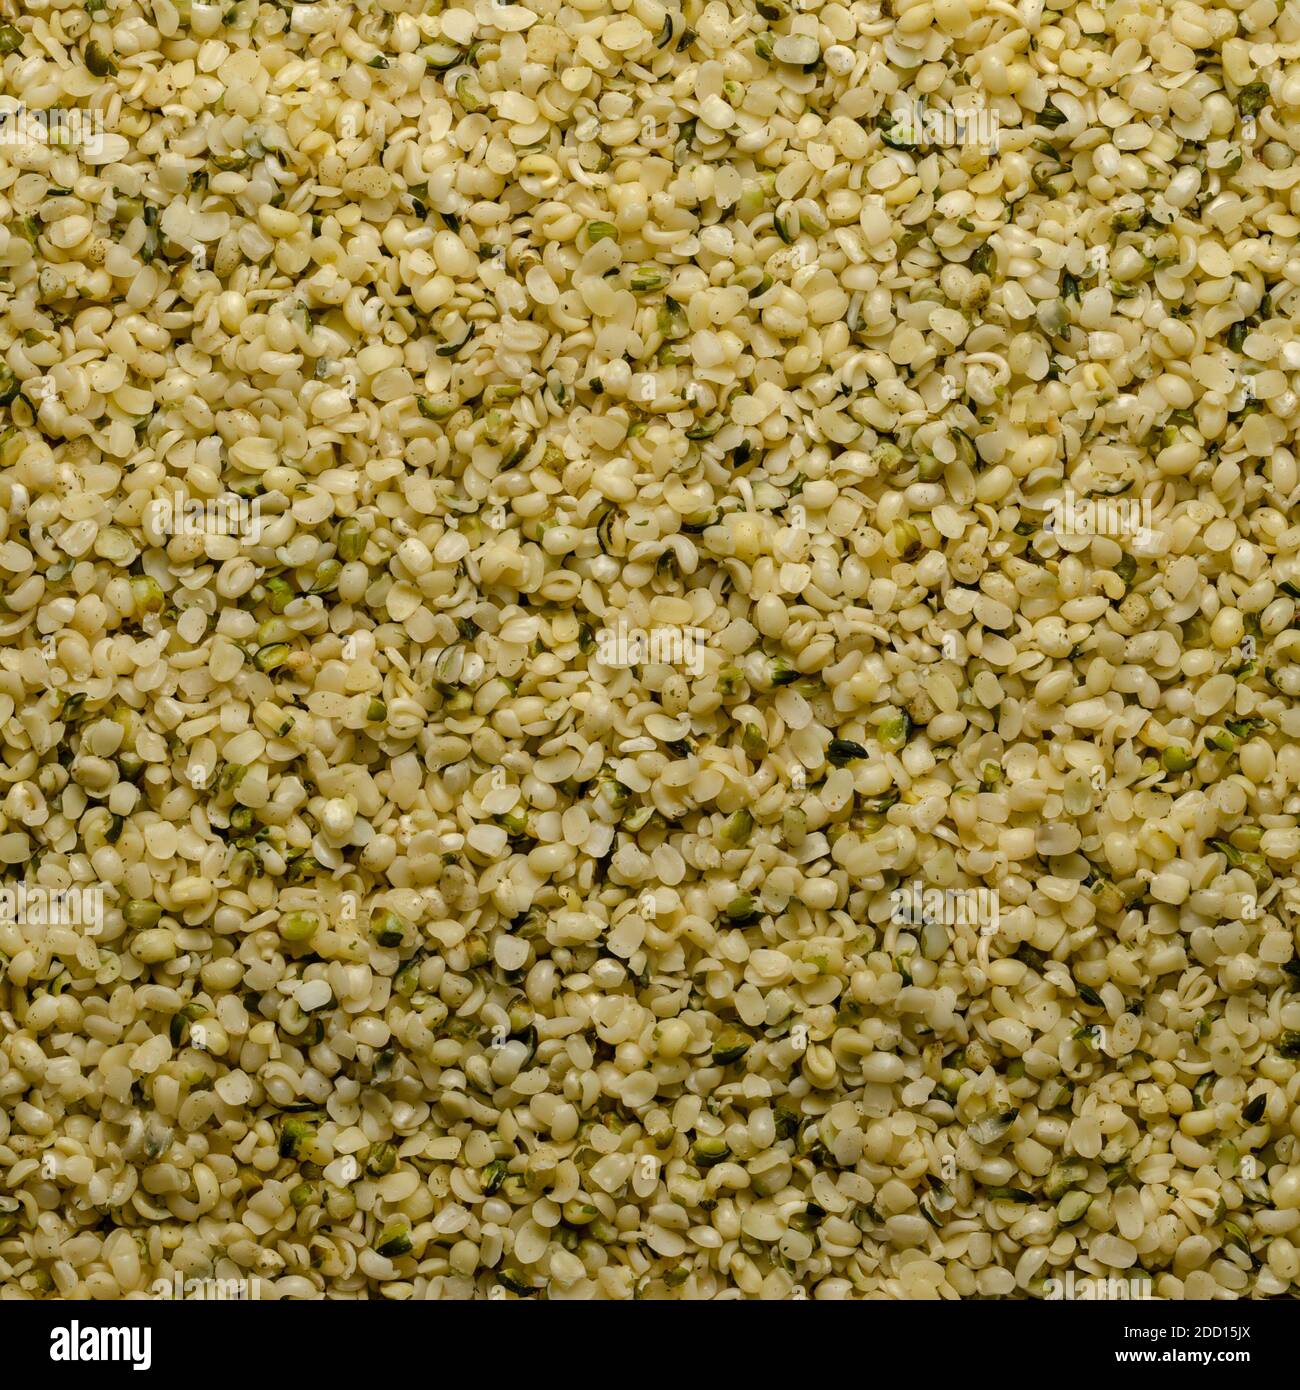 Hulled hemp seeds. Square shaped background and surface of raw and edible hempseeds.  Cannabis sativa, high in protein and a great source of iron. Stock Photo